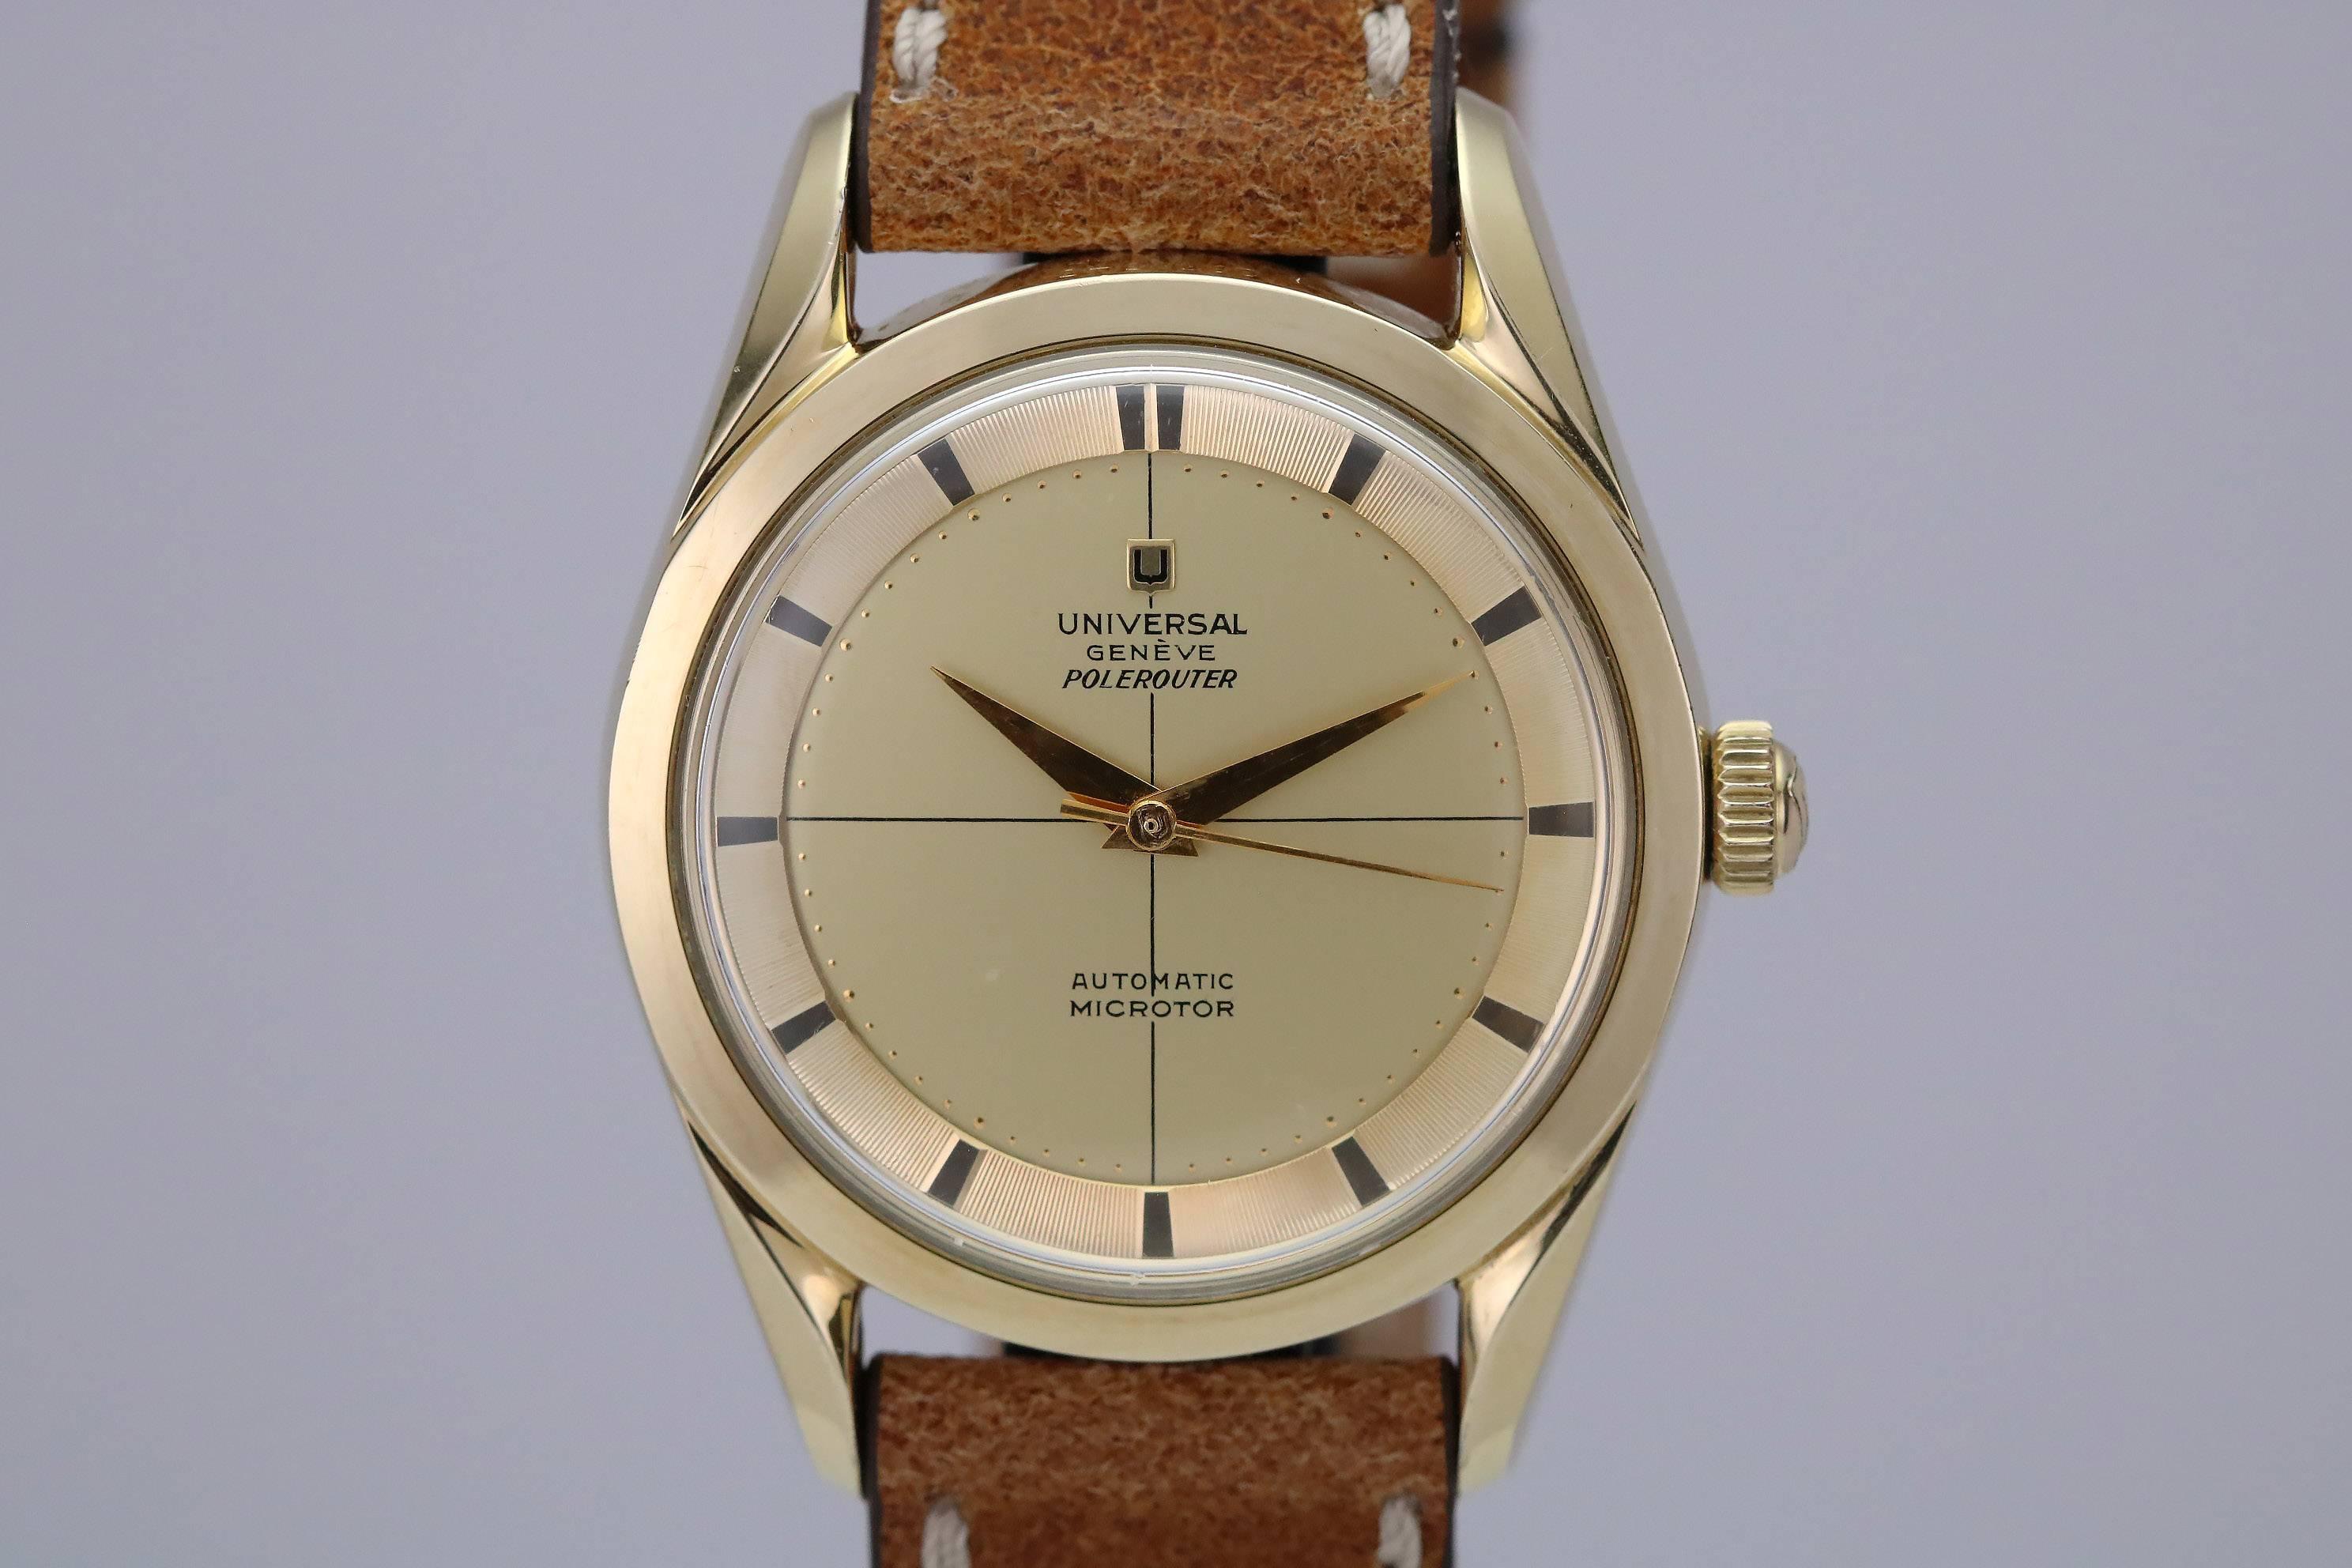 Universal Geneve  Polerouter  reference  in gold plated over stainless steel with sector gold dial, automatic movement and a modern non-Universal leather strap. Circa 1960s.